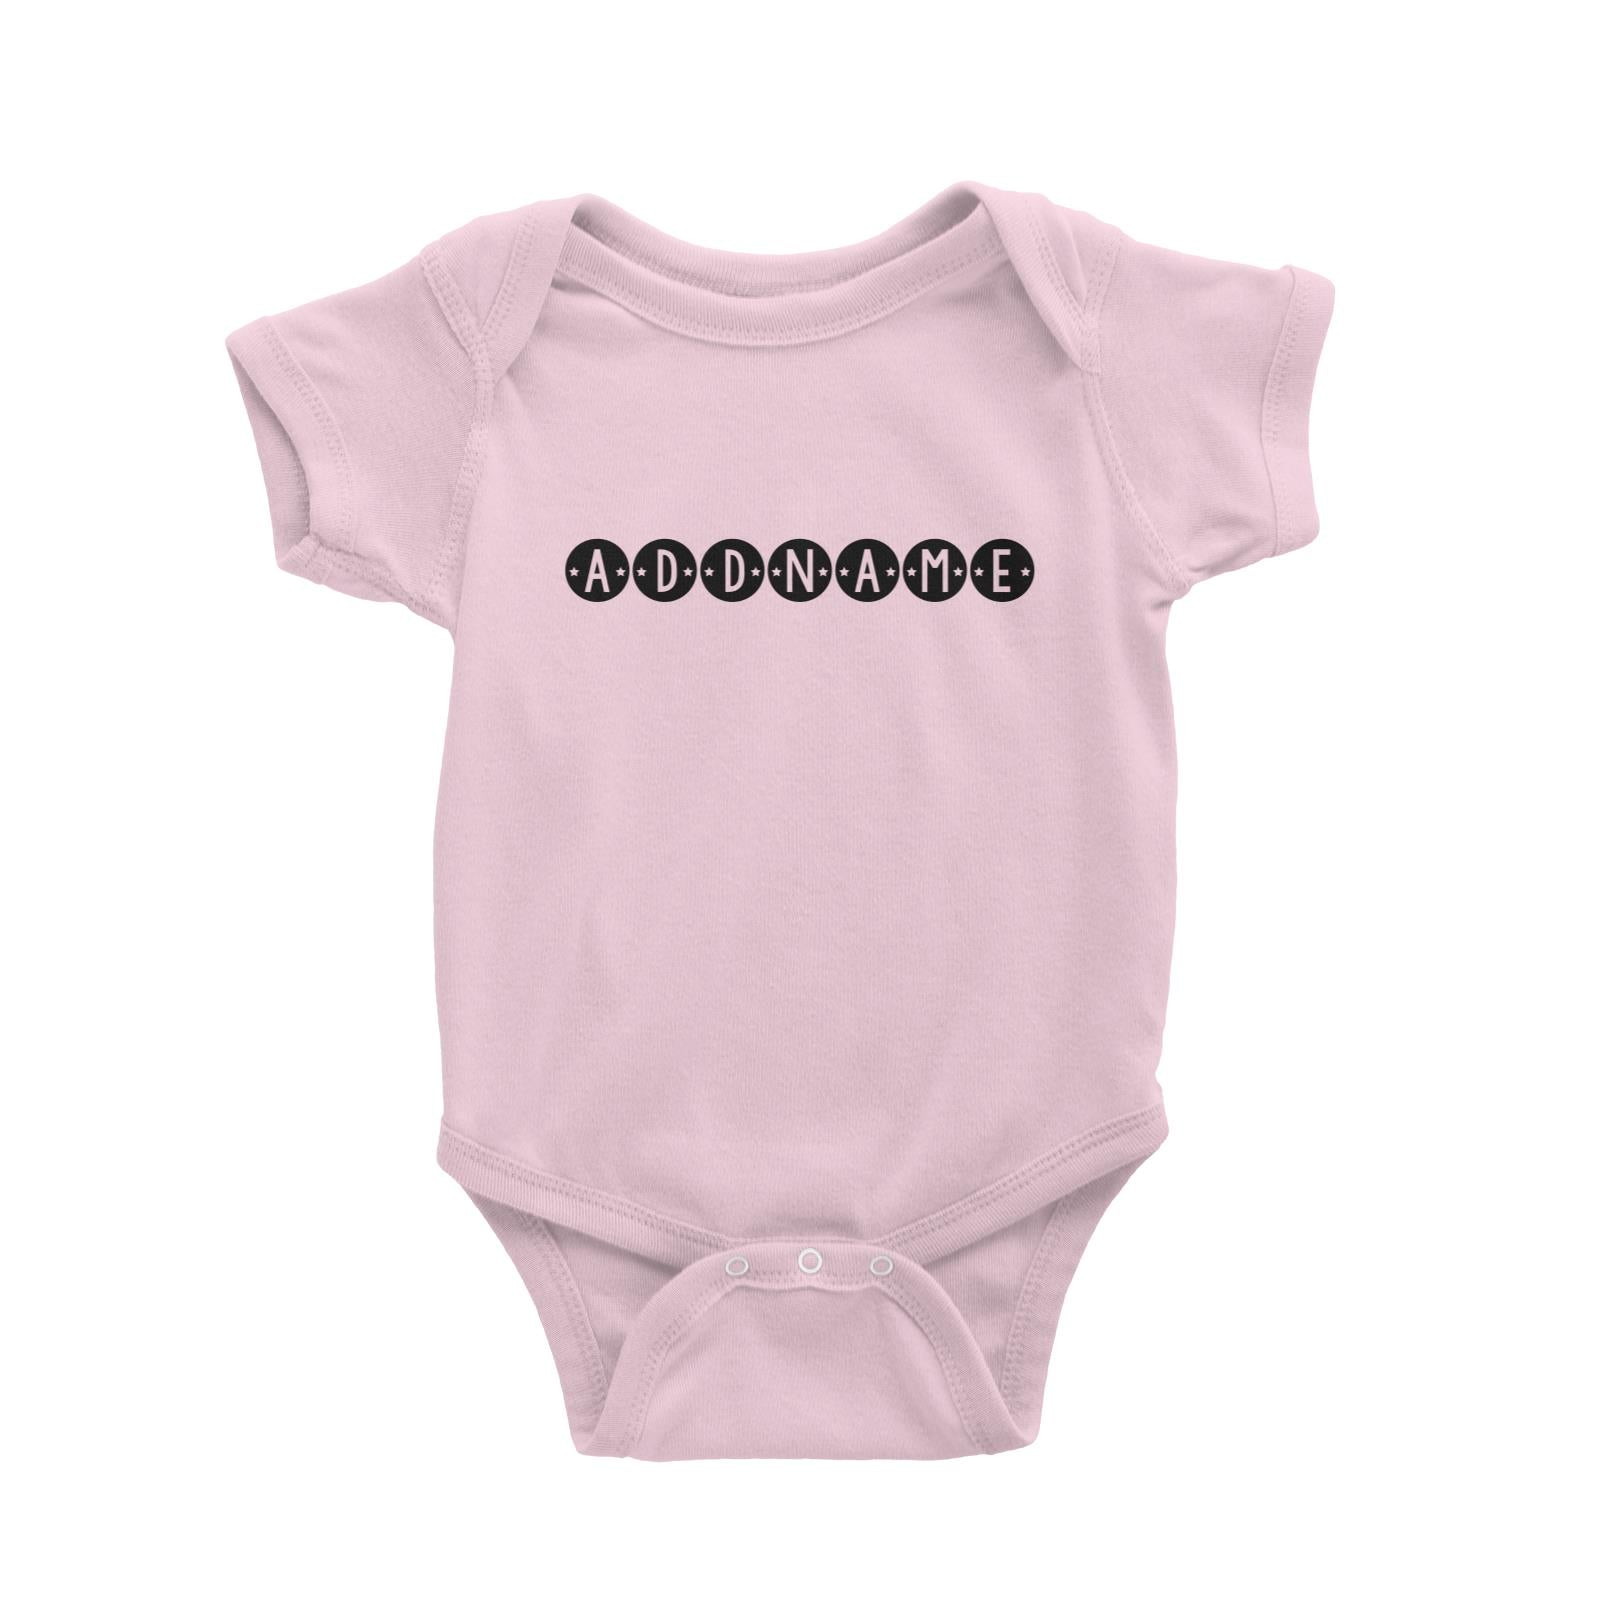 Baby Addname in Circles Baby Romper Personalizable Designs Basic Newborn